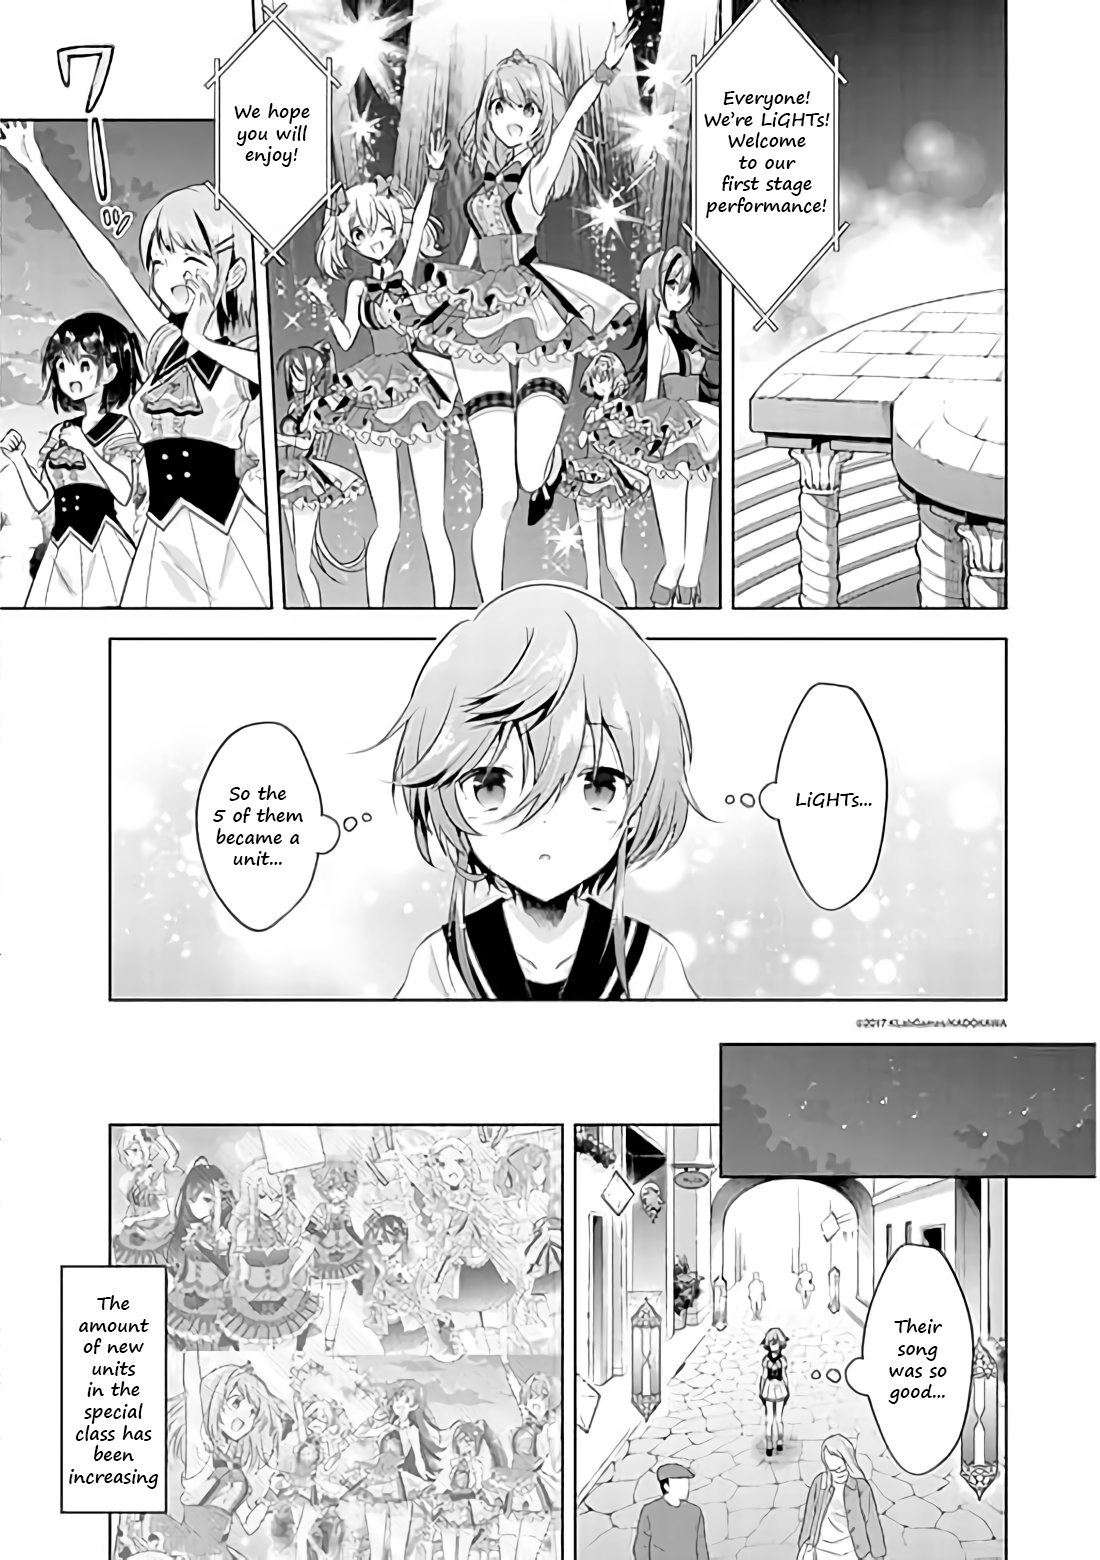 Lapis Re:lights Web Comic (Our Prelude) Chapter 14 #1